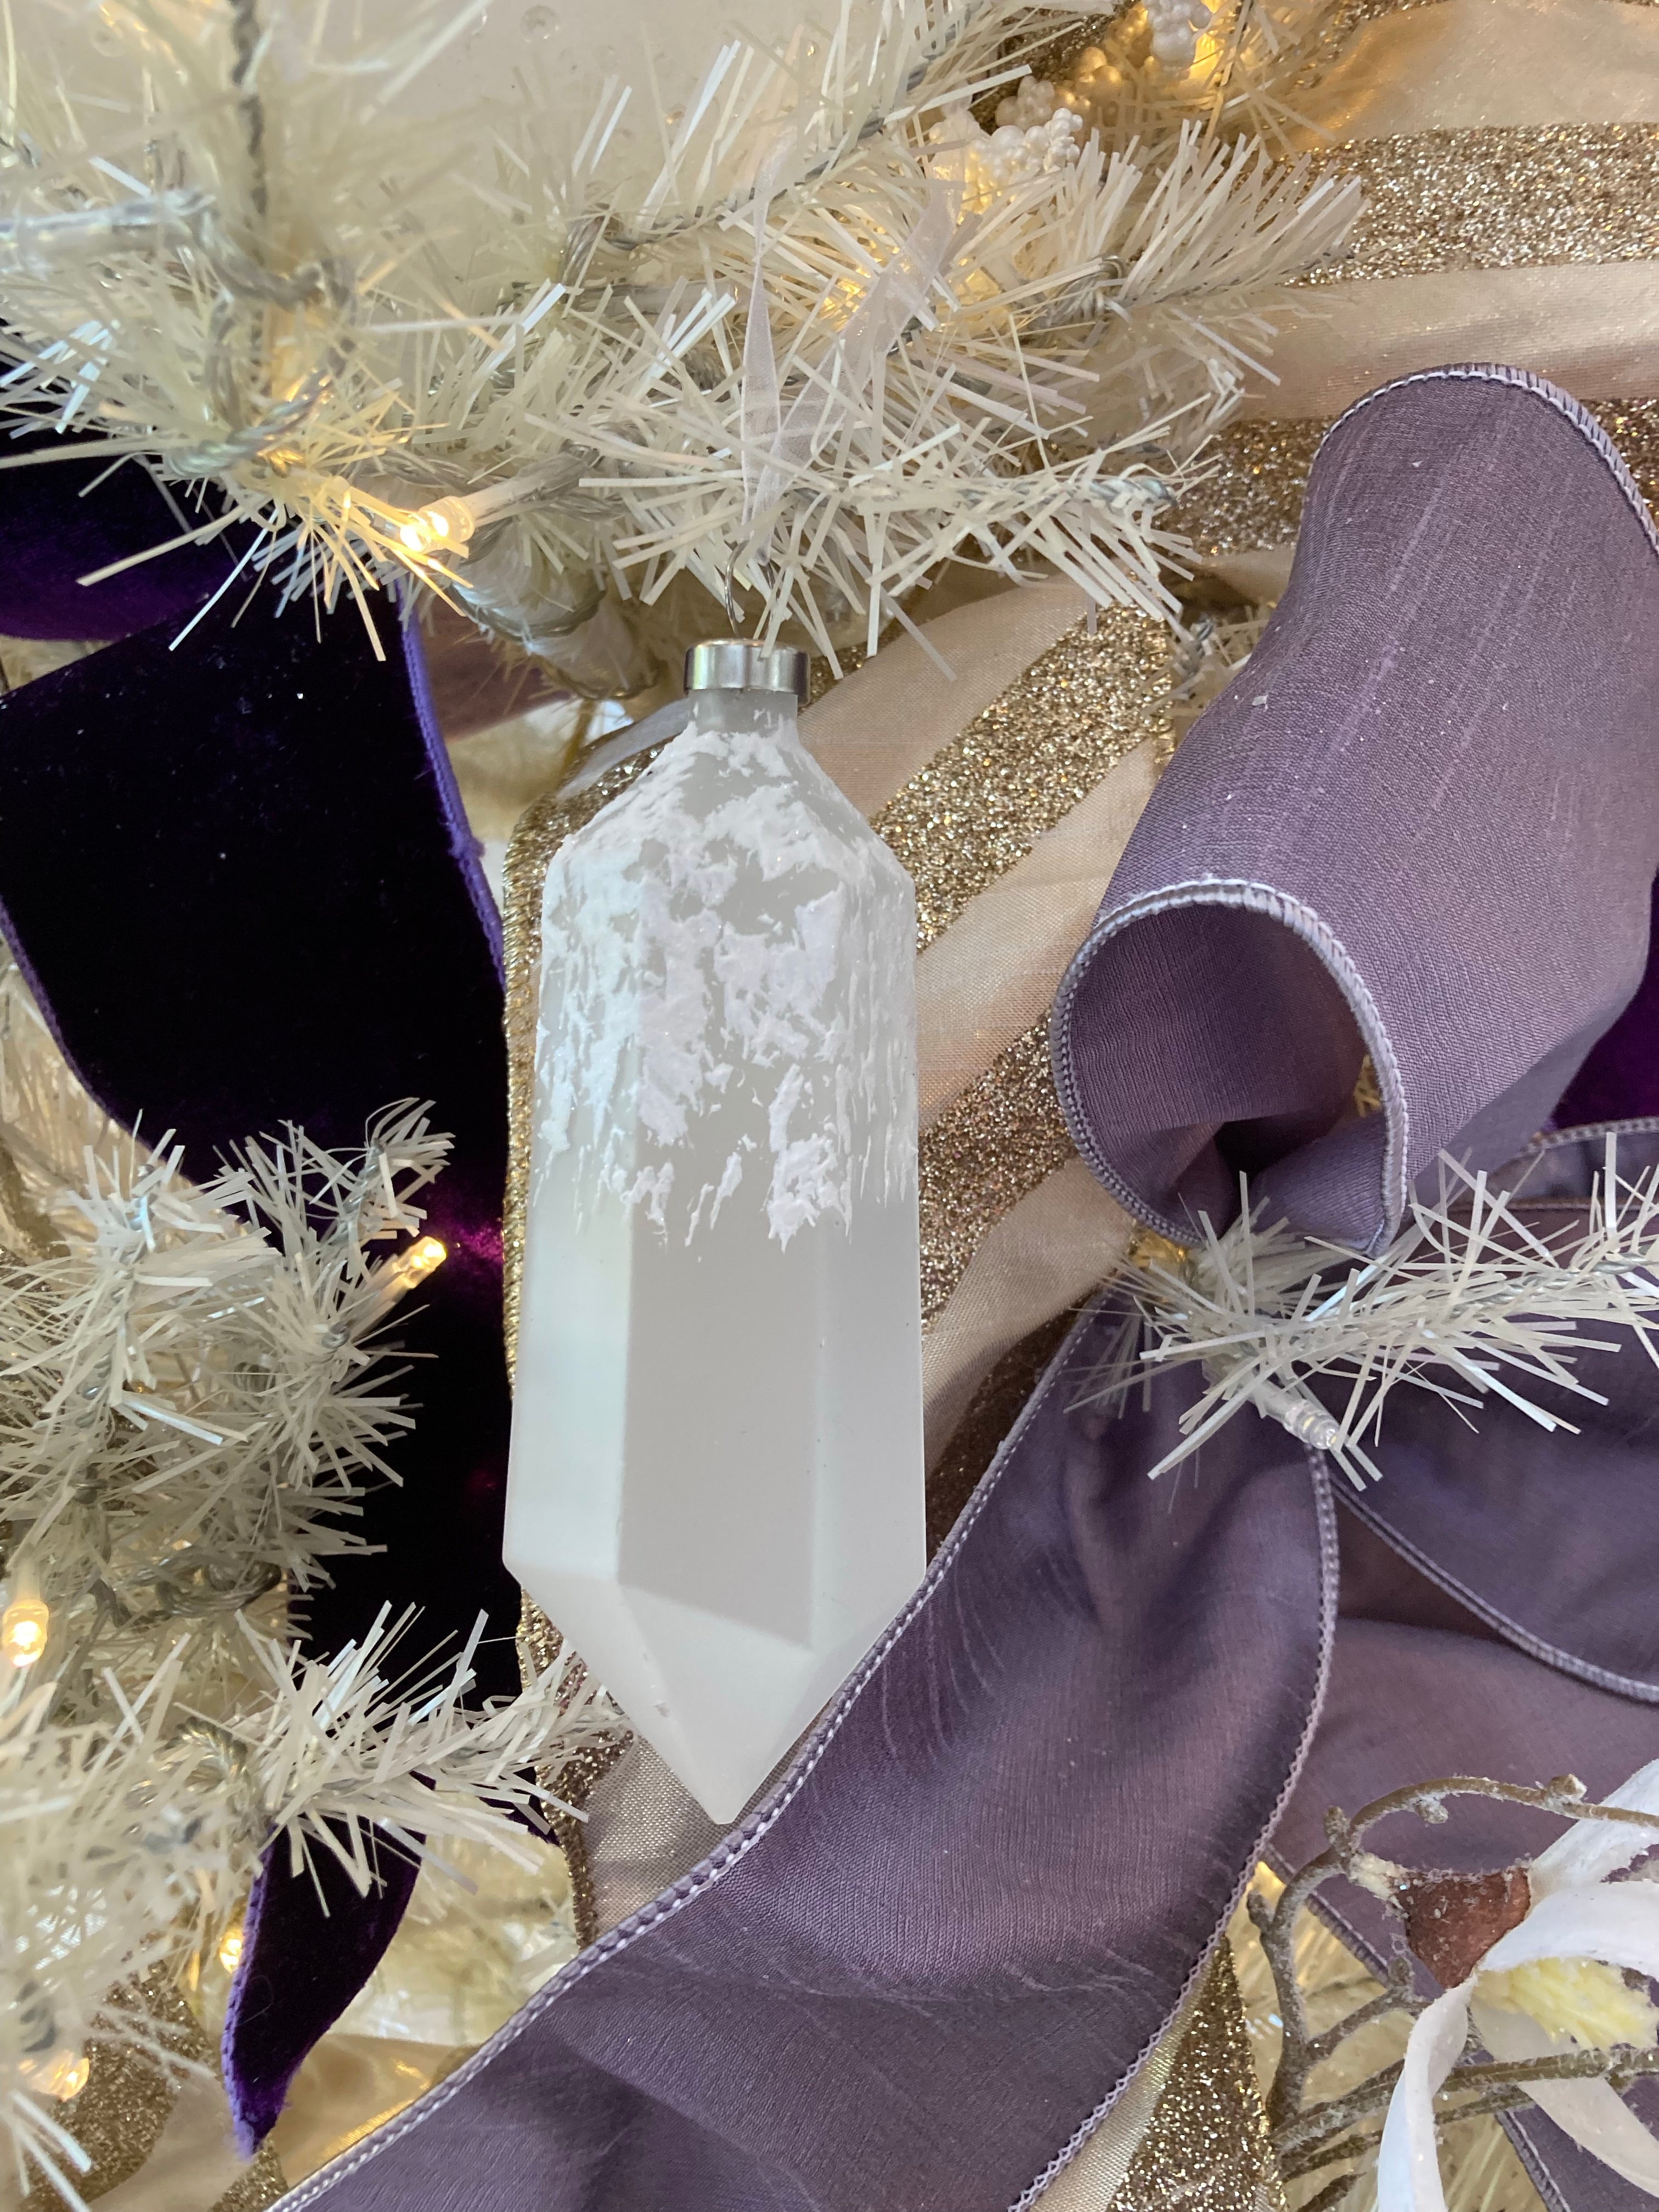 Frosted Glass Crystal Shaped Ornament - Available in Two Sizes